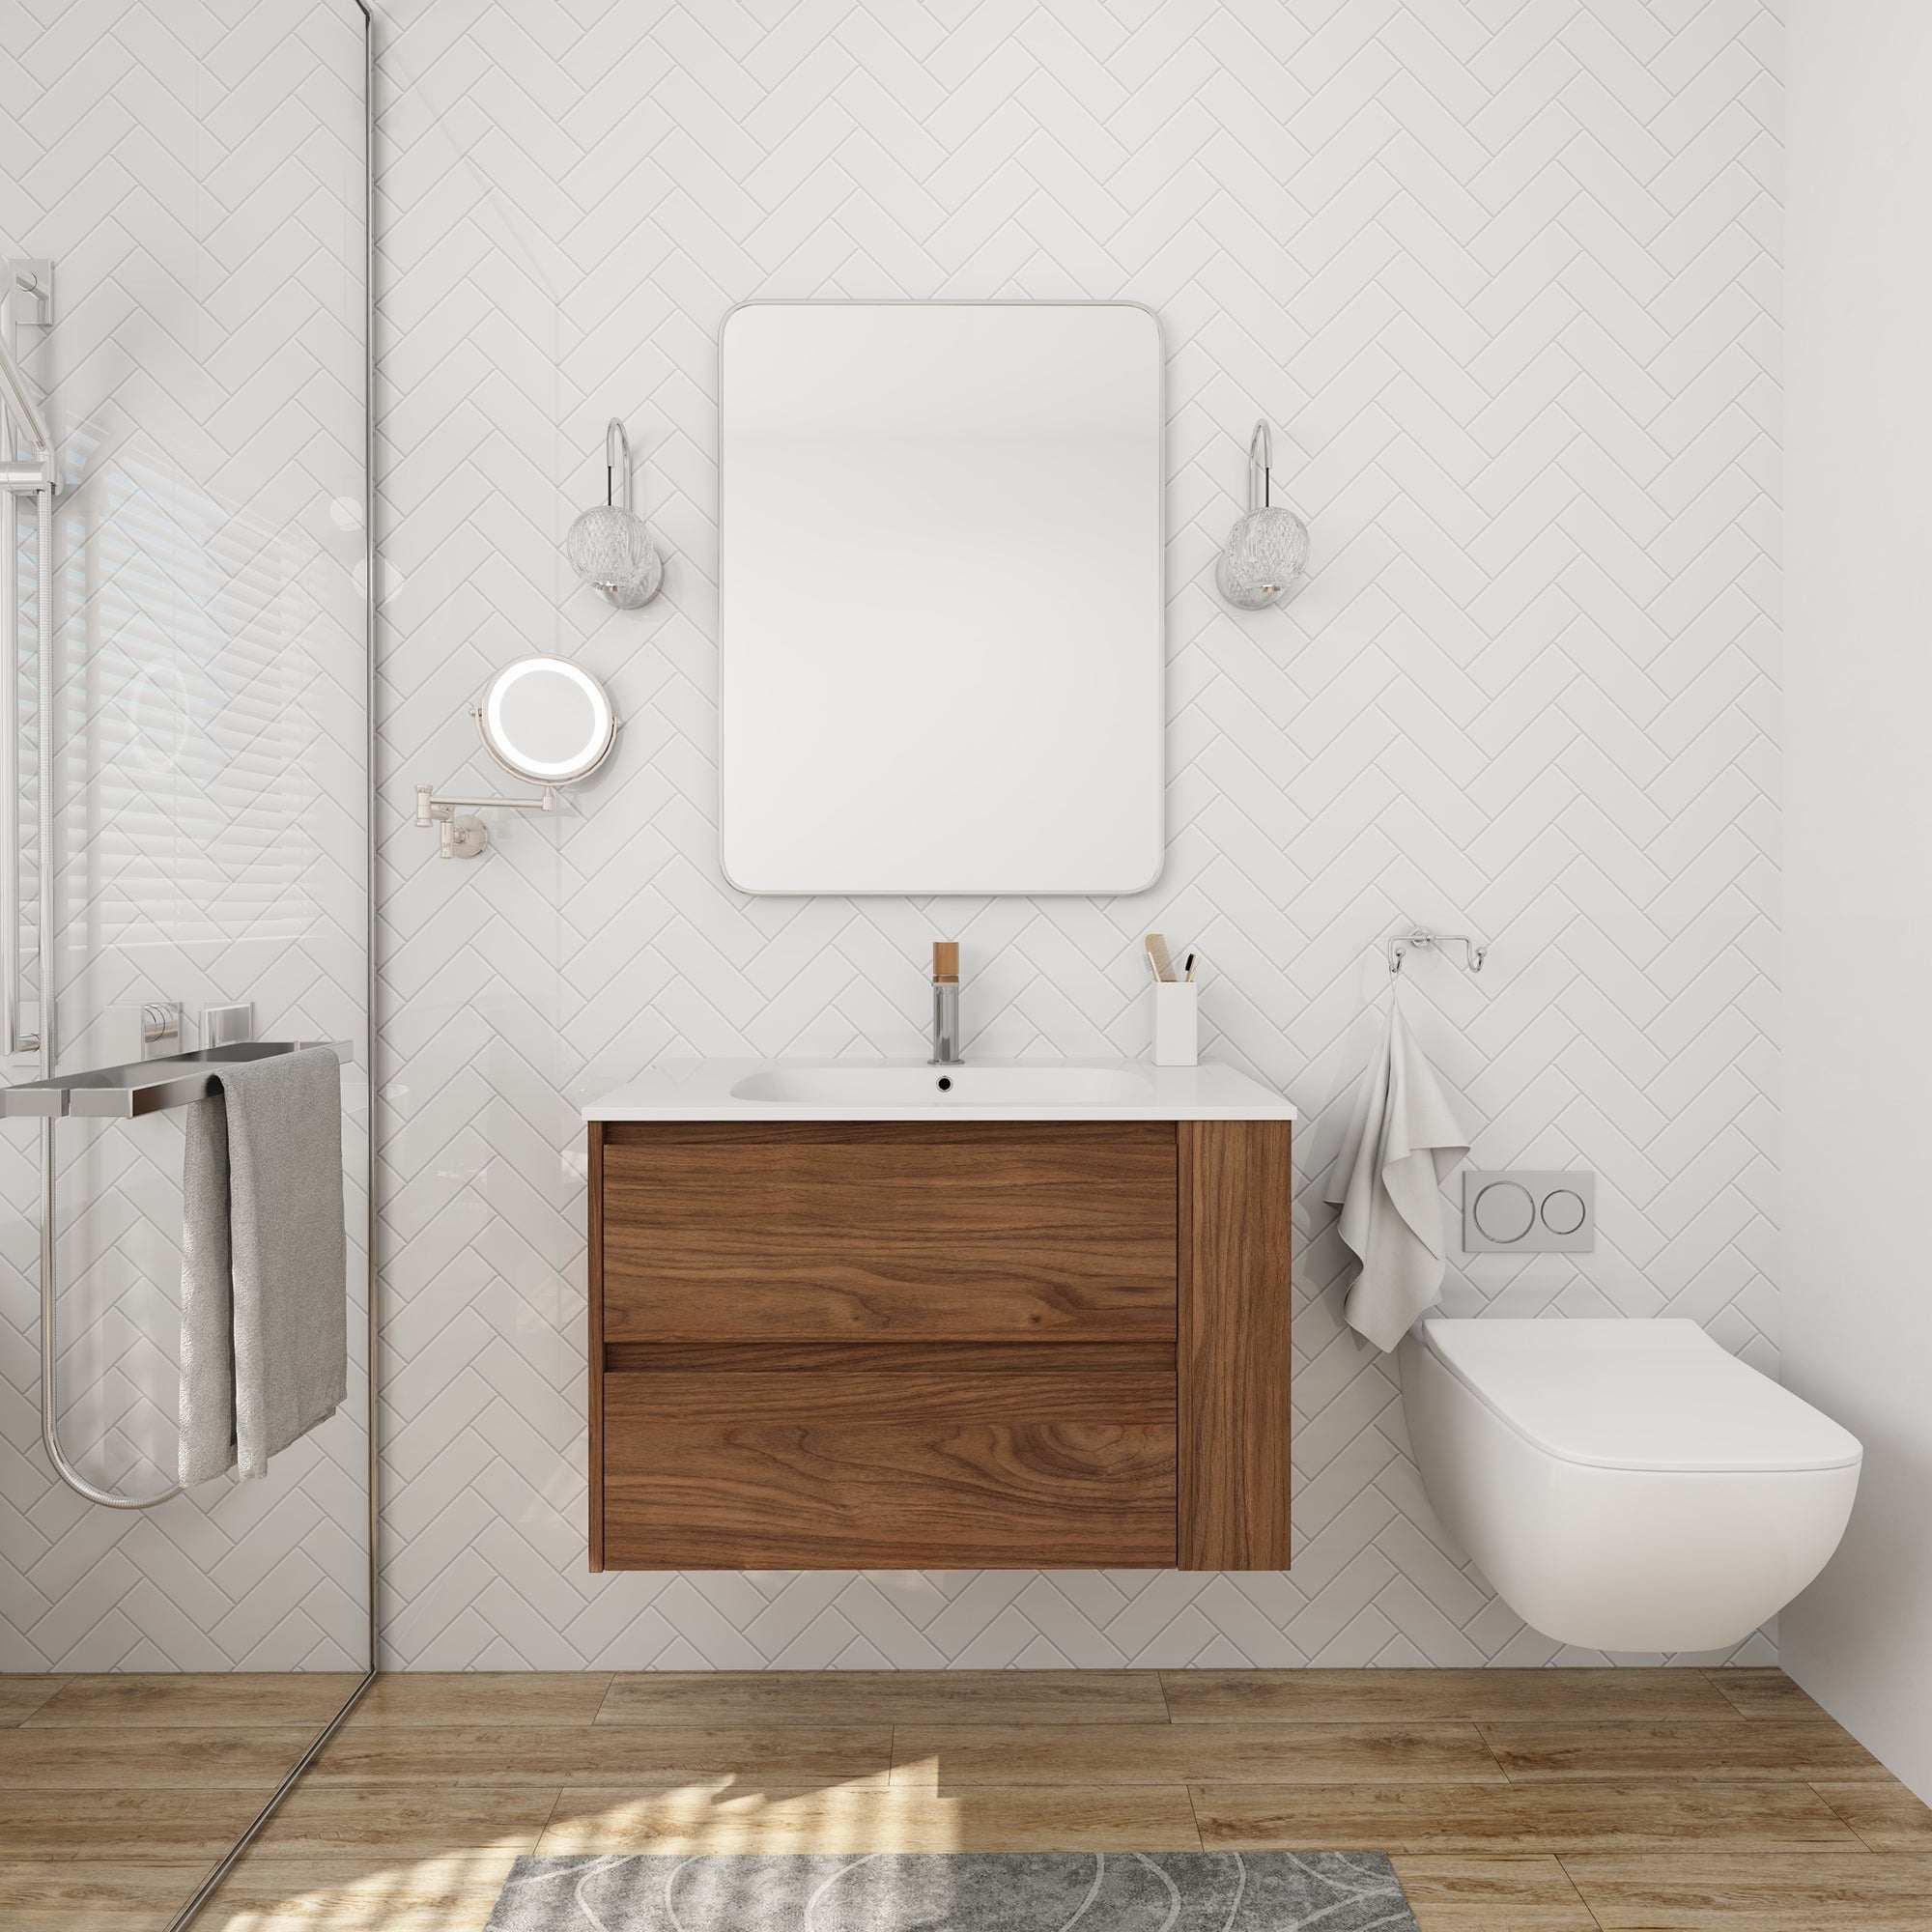 https://ak1.ostkcdn.com/images/products/is/images/direct/25b61e43208b84cc0975a0c3dad7e3ba8c317e8f/30-Inch-Wall-Mounted-Plywood-Bathroom-Vanity-Set-with-Integrated-Resin-Basin-and-Drawer.jpg